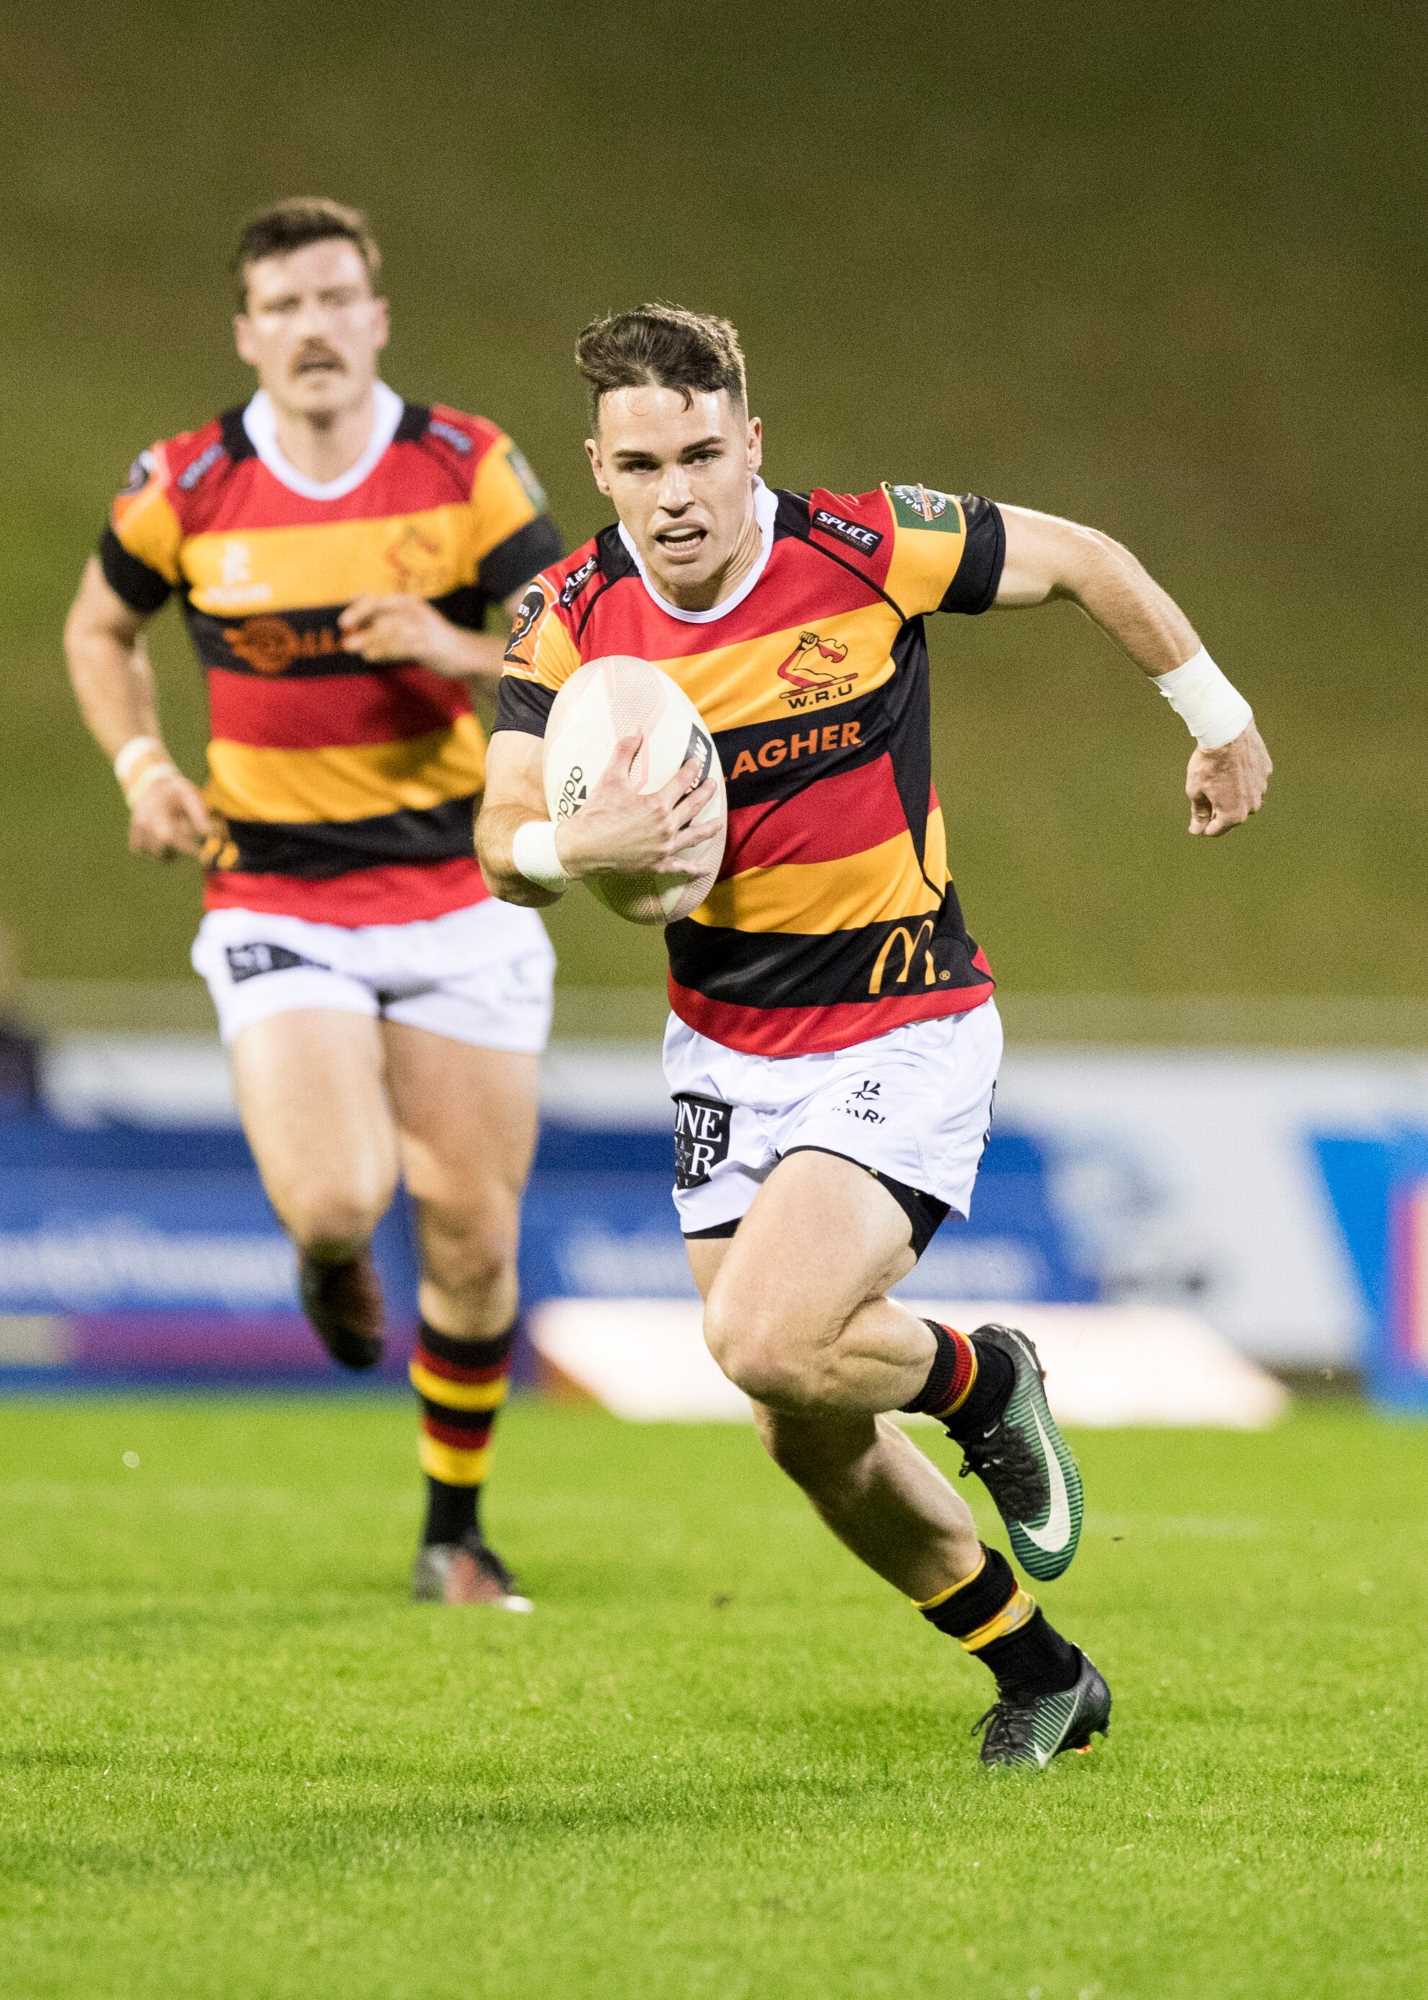 Waikato team named for the Battle of the Bombay’s clash with Auckland